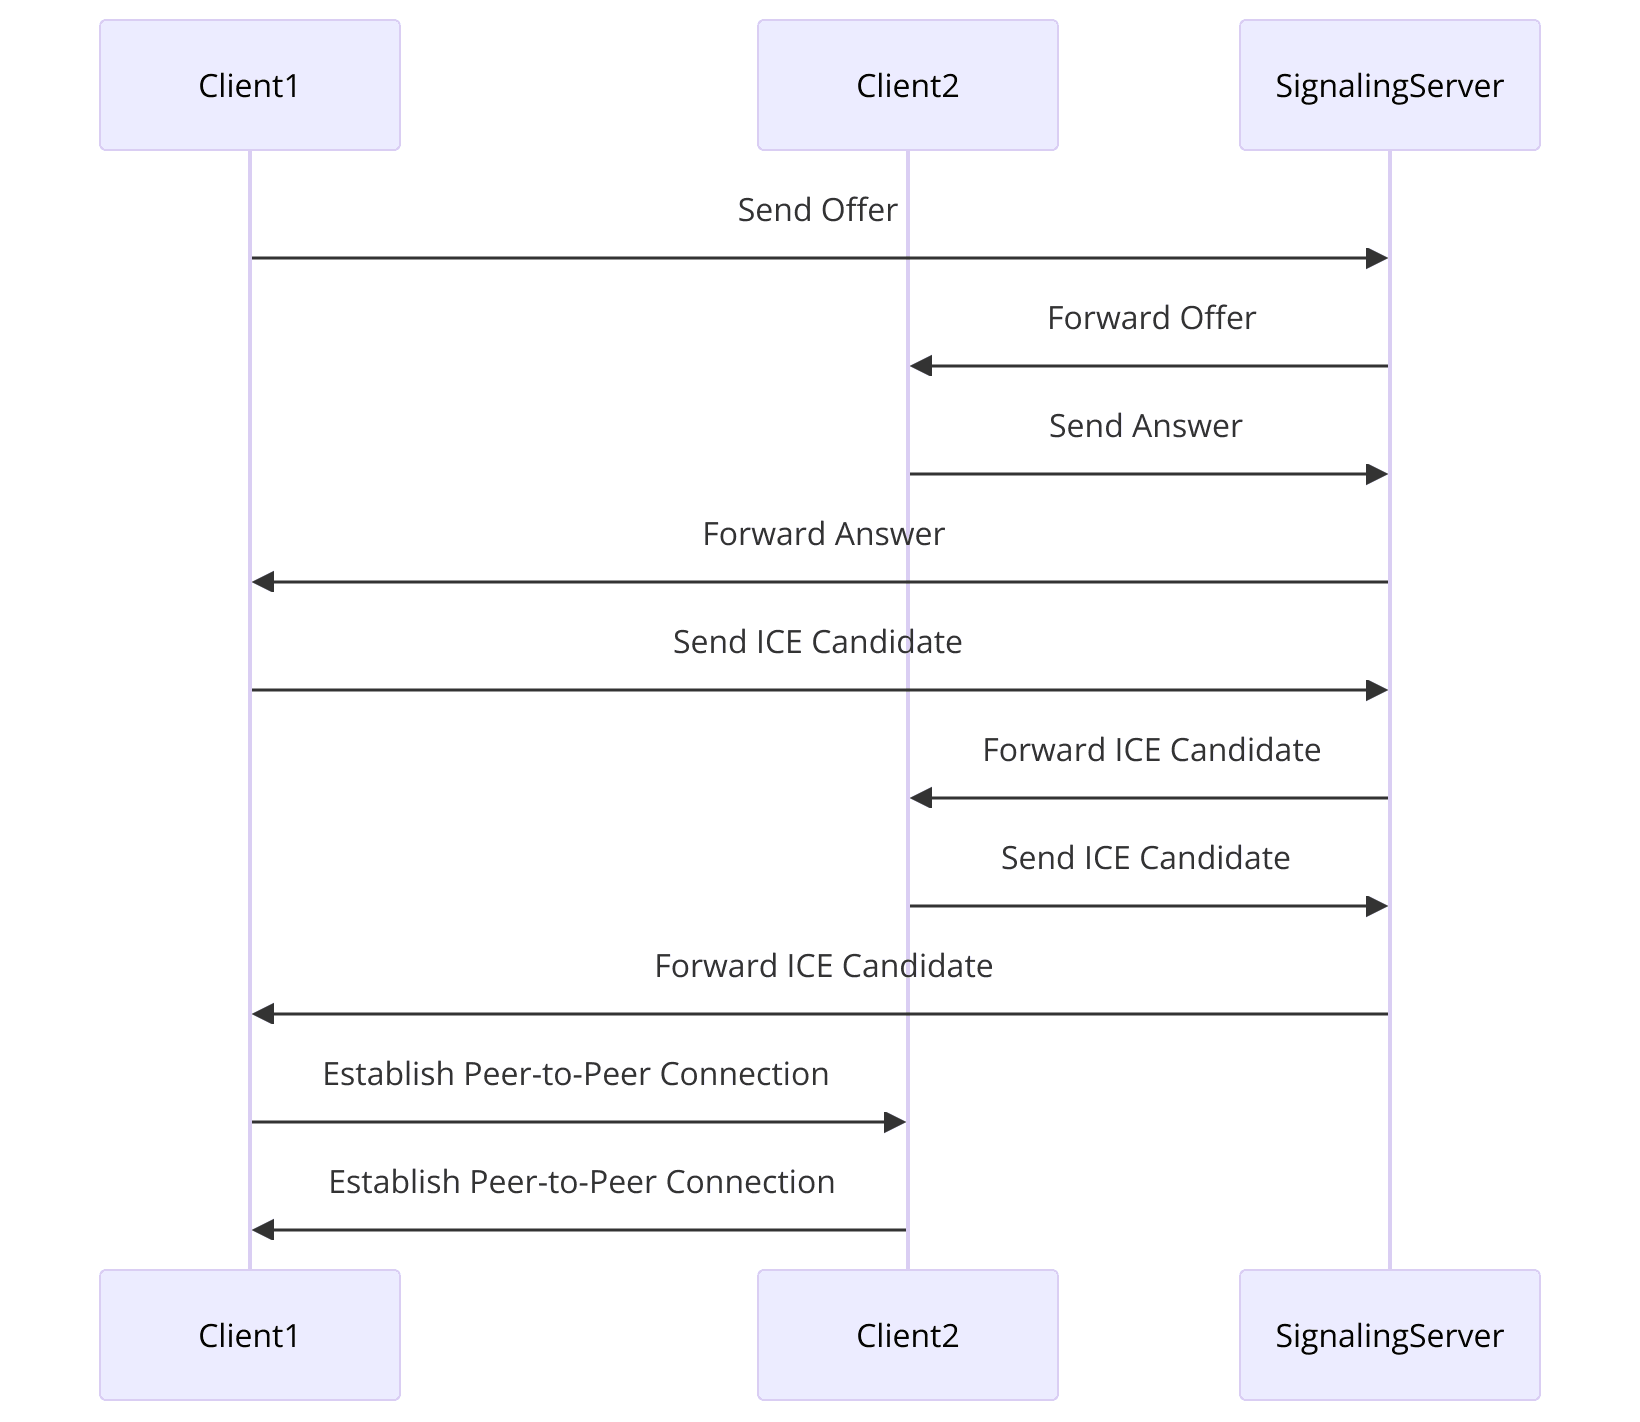 WebRTC architecture diagram with signaling server and peer-to-peer connections